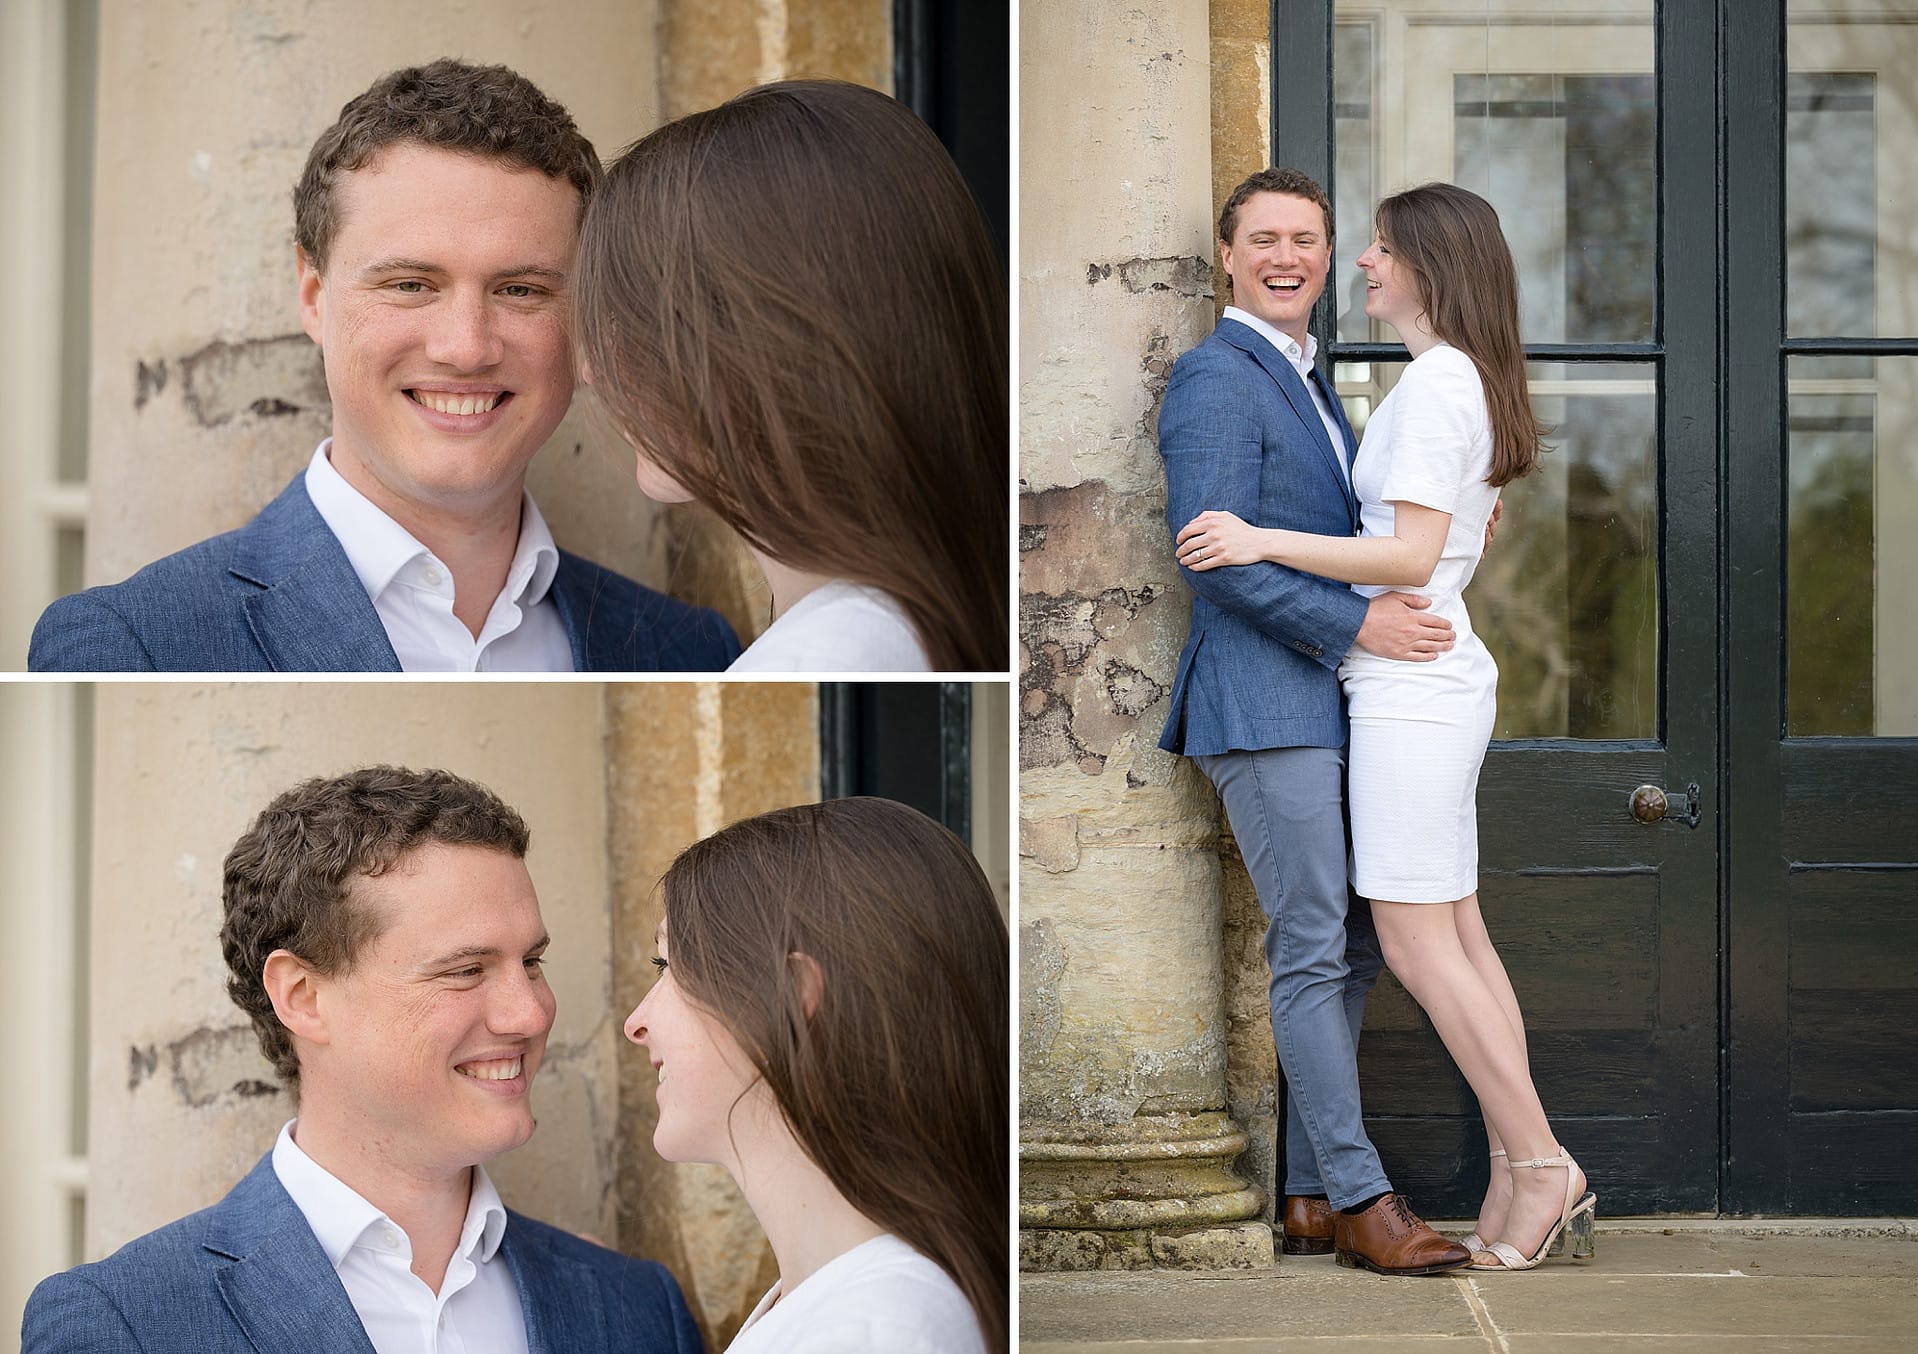 Close-up photos of groom-to-be during engagement portrait photo session